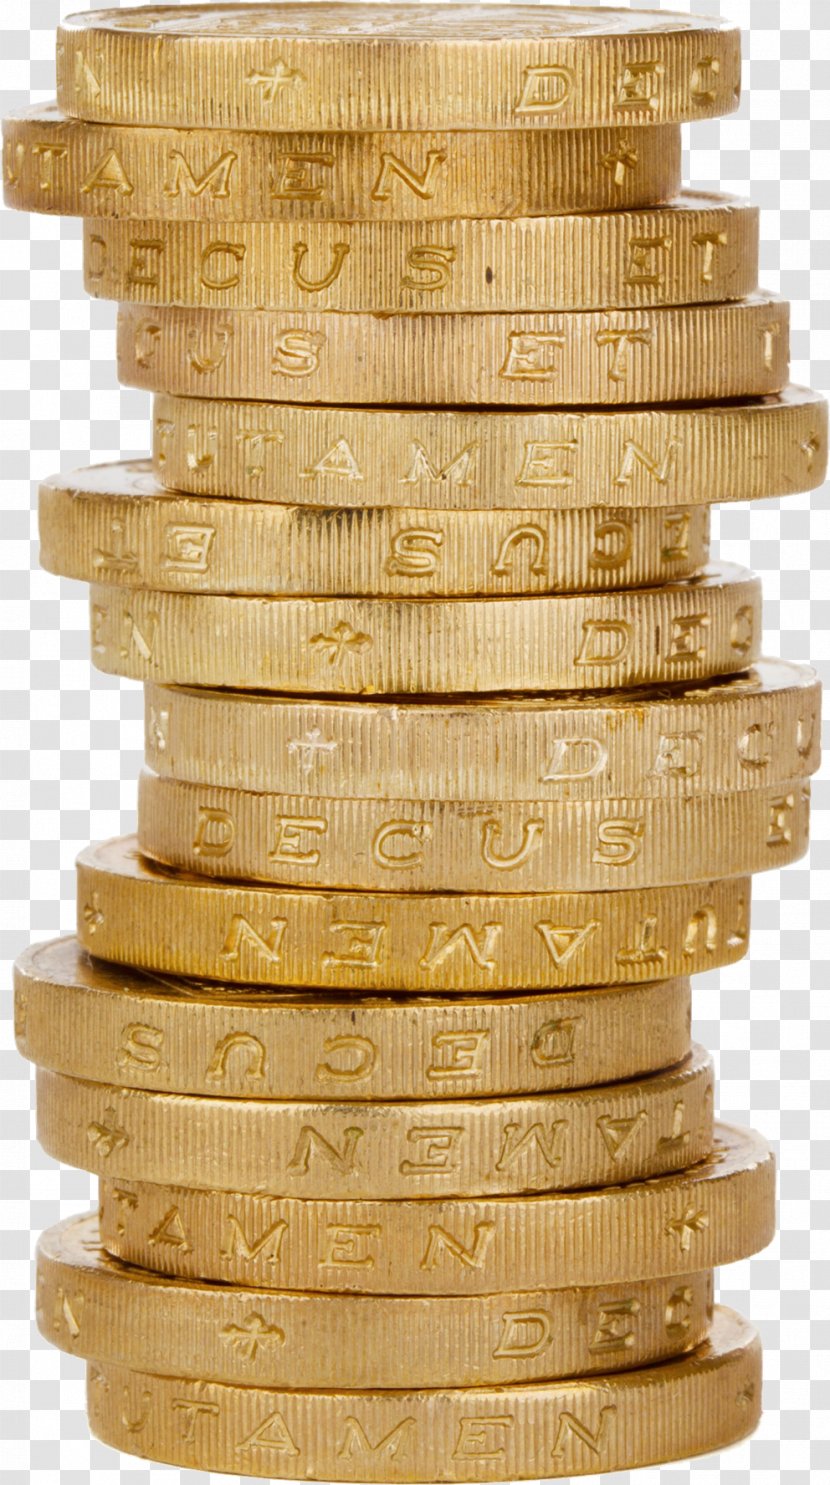 Gold Coin Money Finance - Currency - Financial Coins Transparent PNG